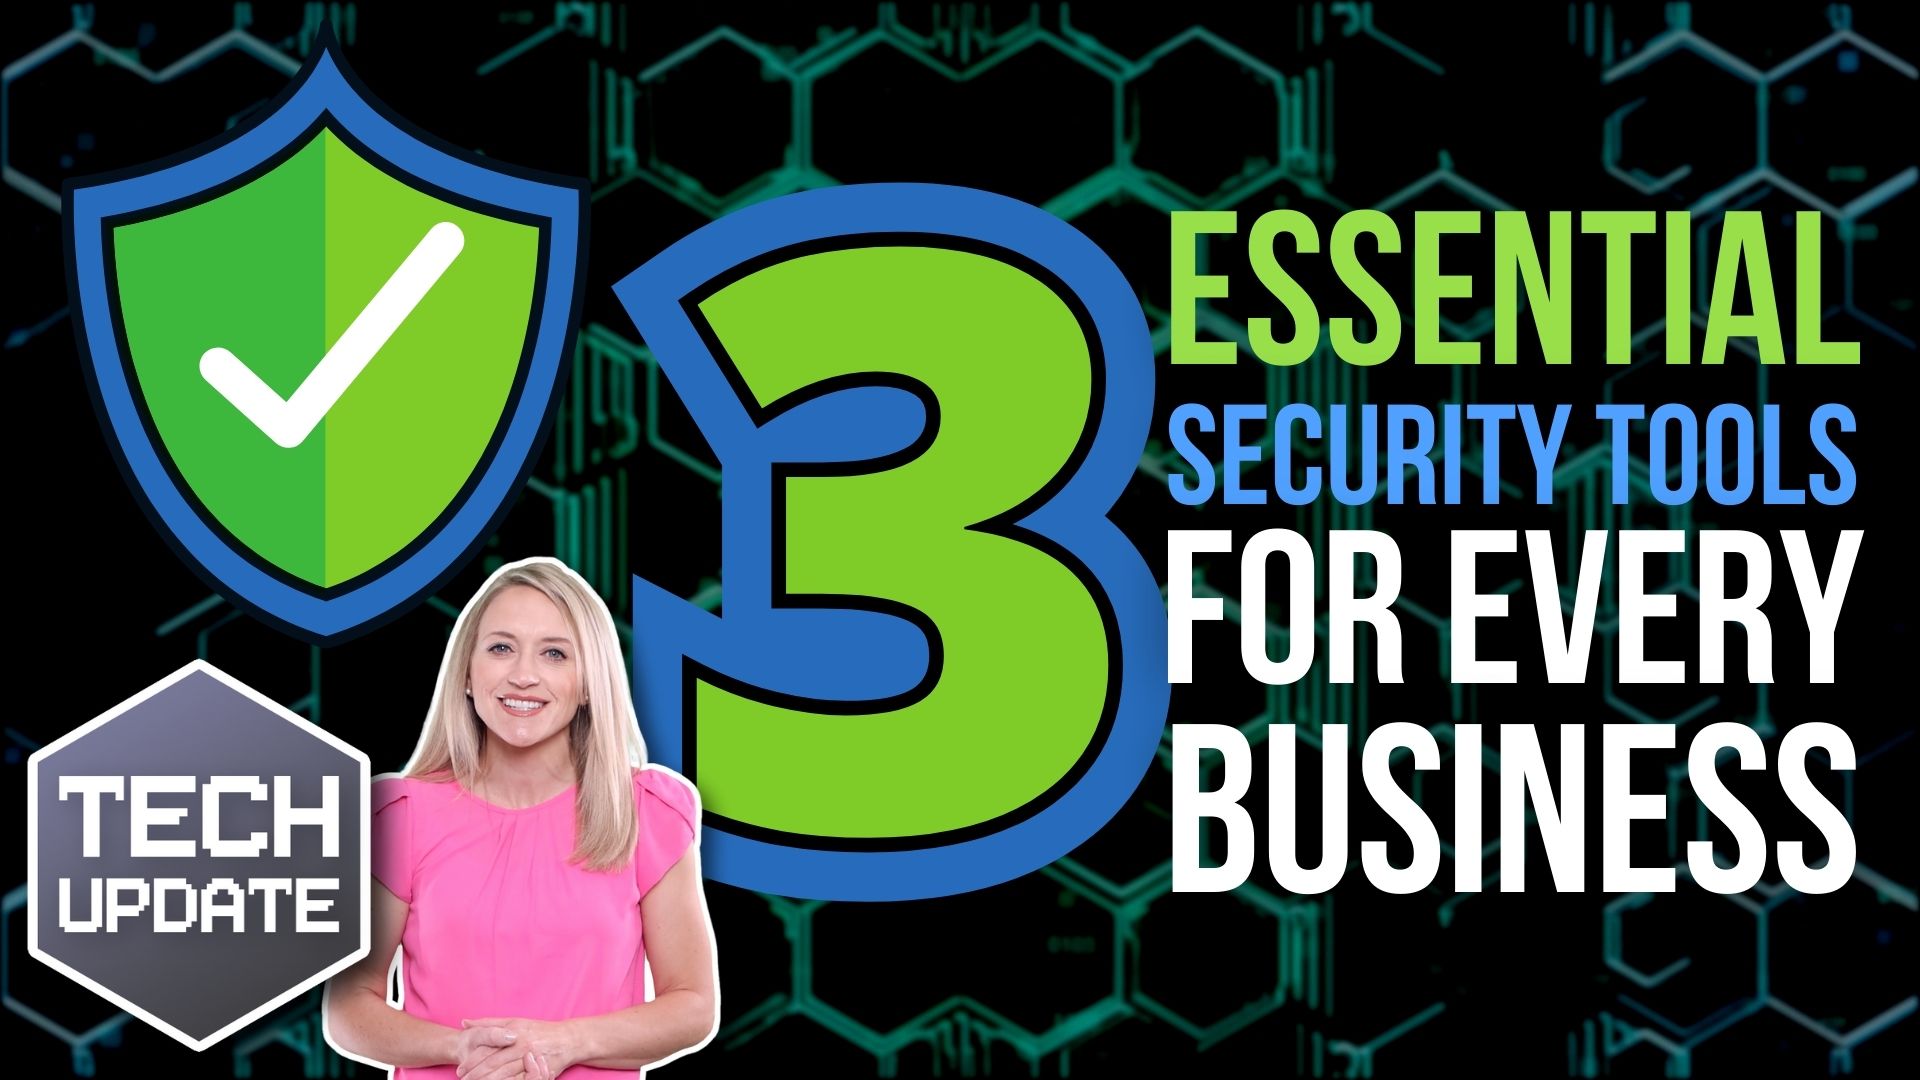 3 essential security tools for every business